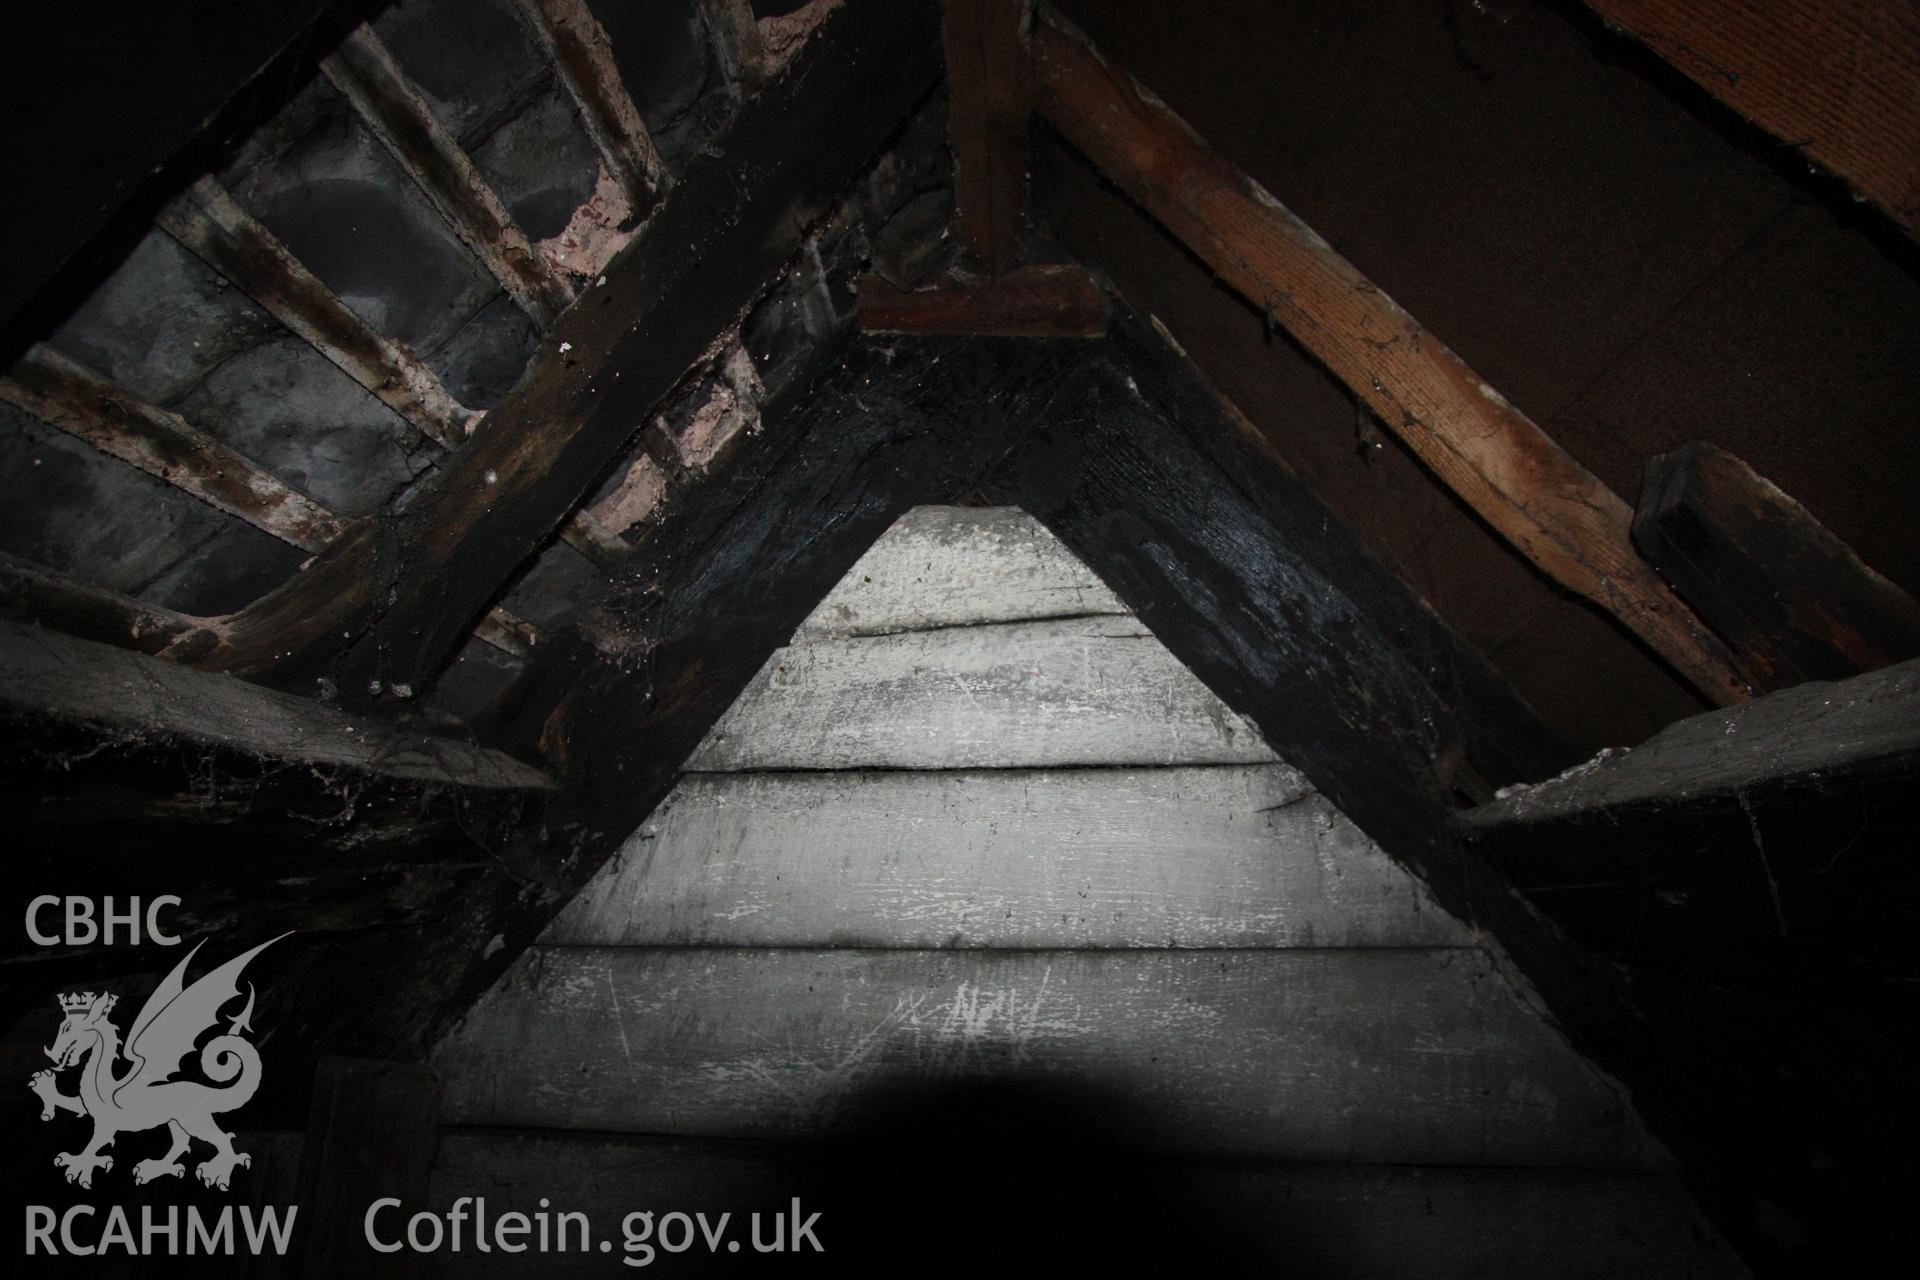 Colour photograph showing interior of timber roof frame at Porth-y-Dwr, 67 Clwyd Street, Ruthin. Photographed during survey conducted by Geoff Ward on 10th June 2013.